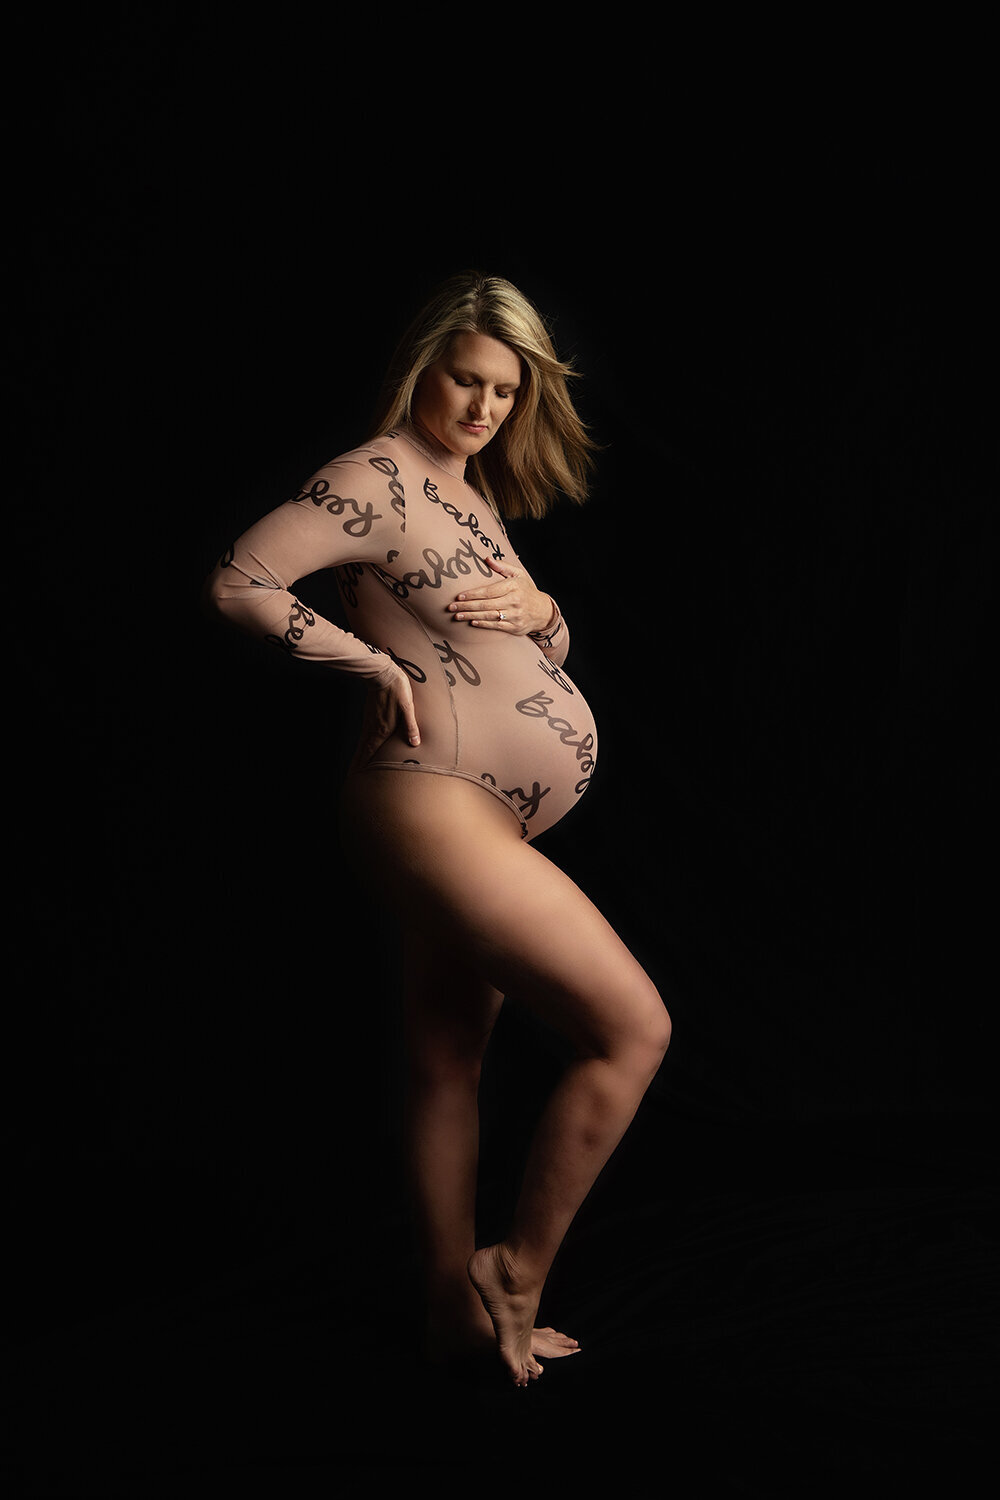 New-Orleans-maternity-photographer-16